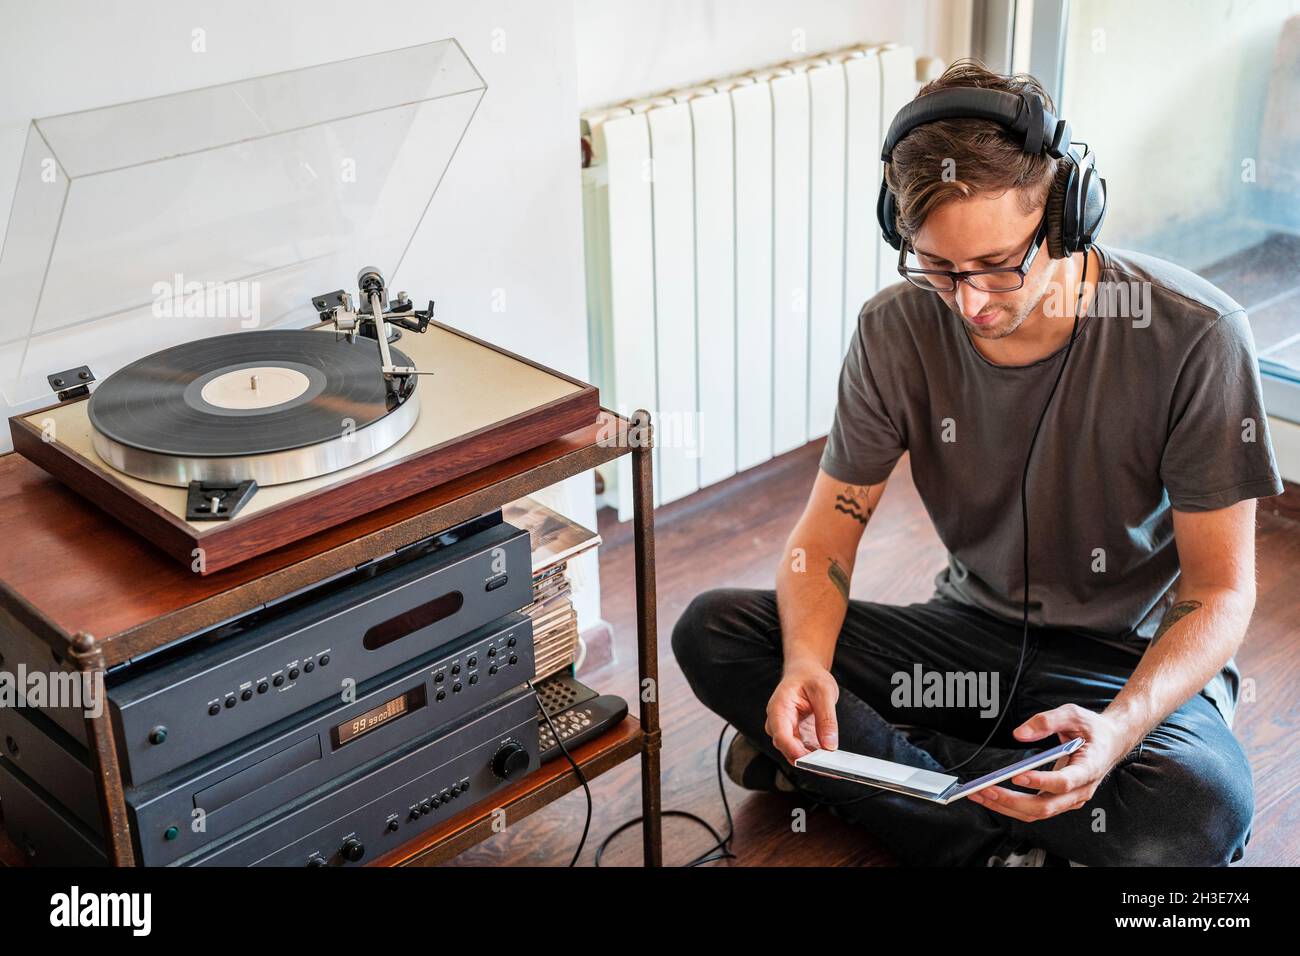 From above of man in casual clothes and headphones reading disc packaging while sitting on floor near record player Stock Photo